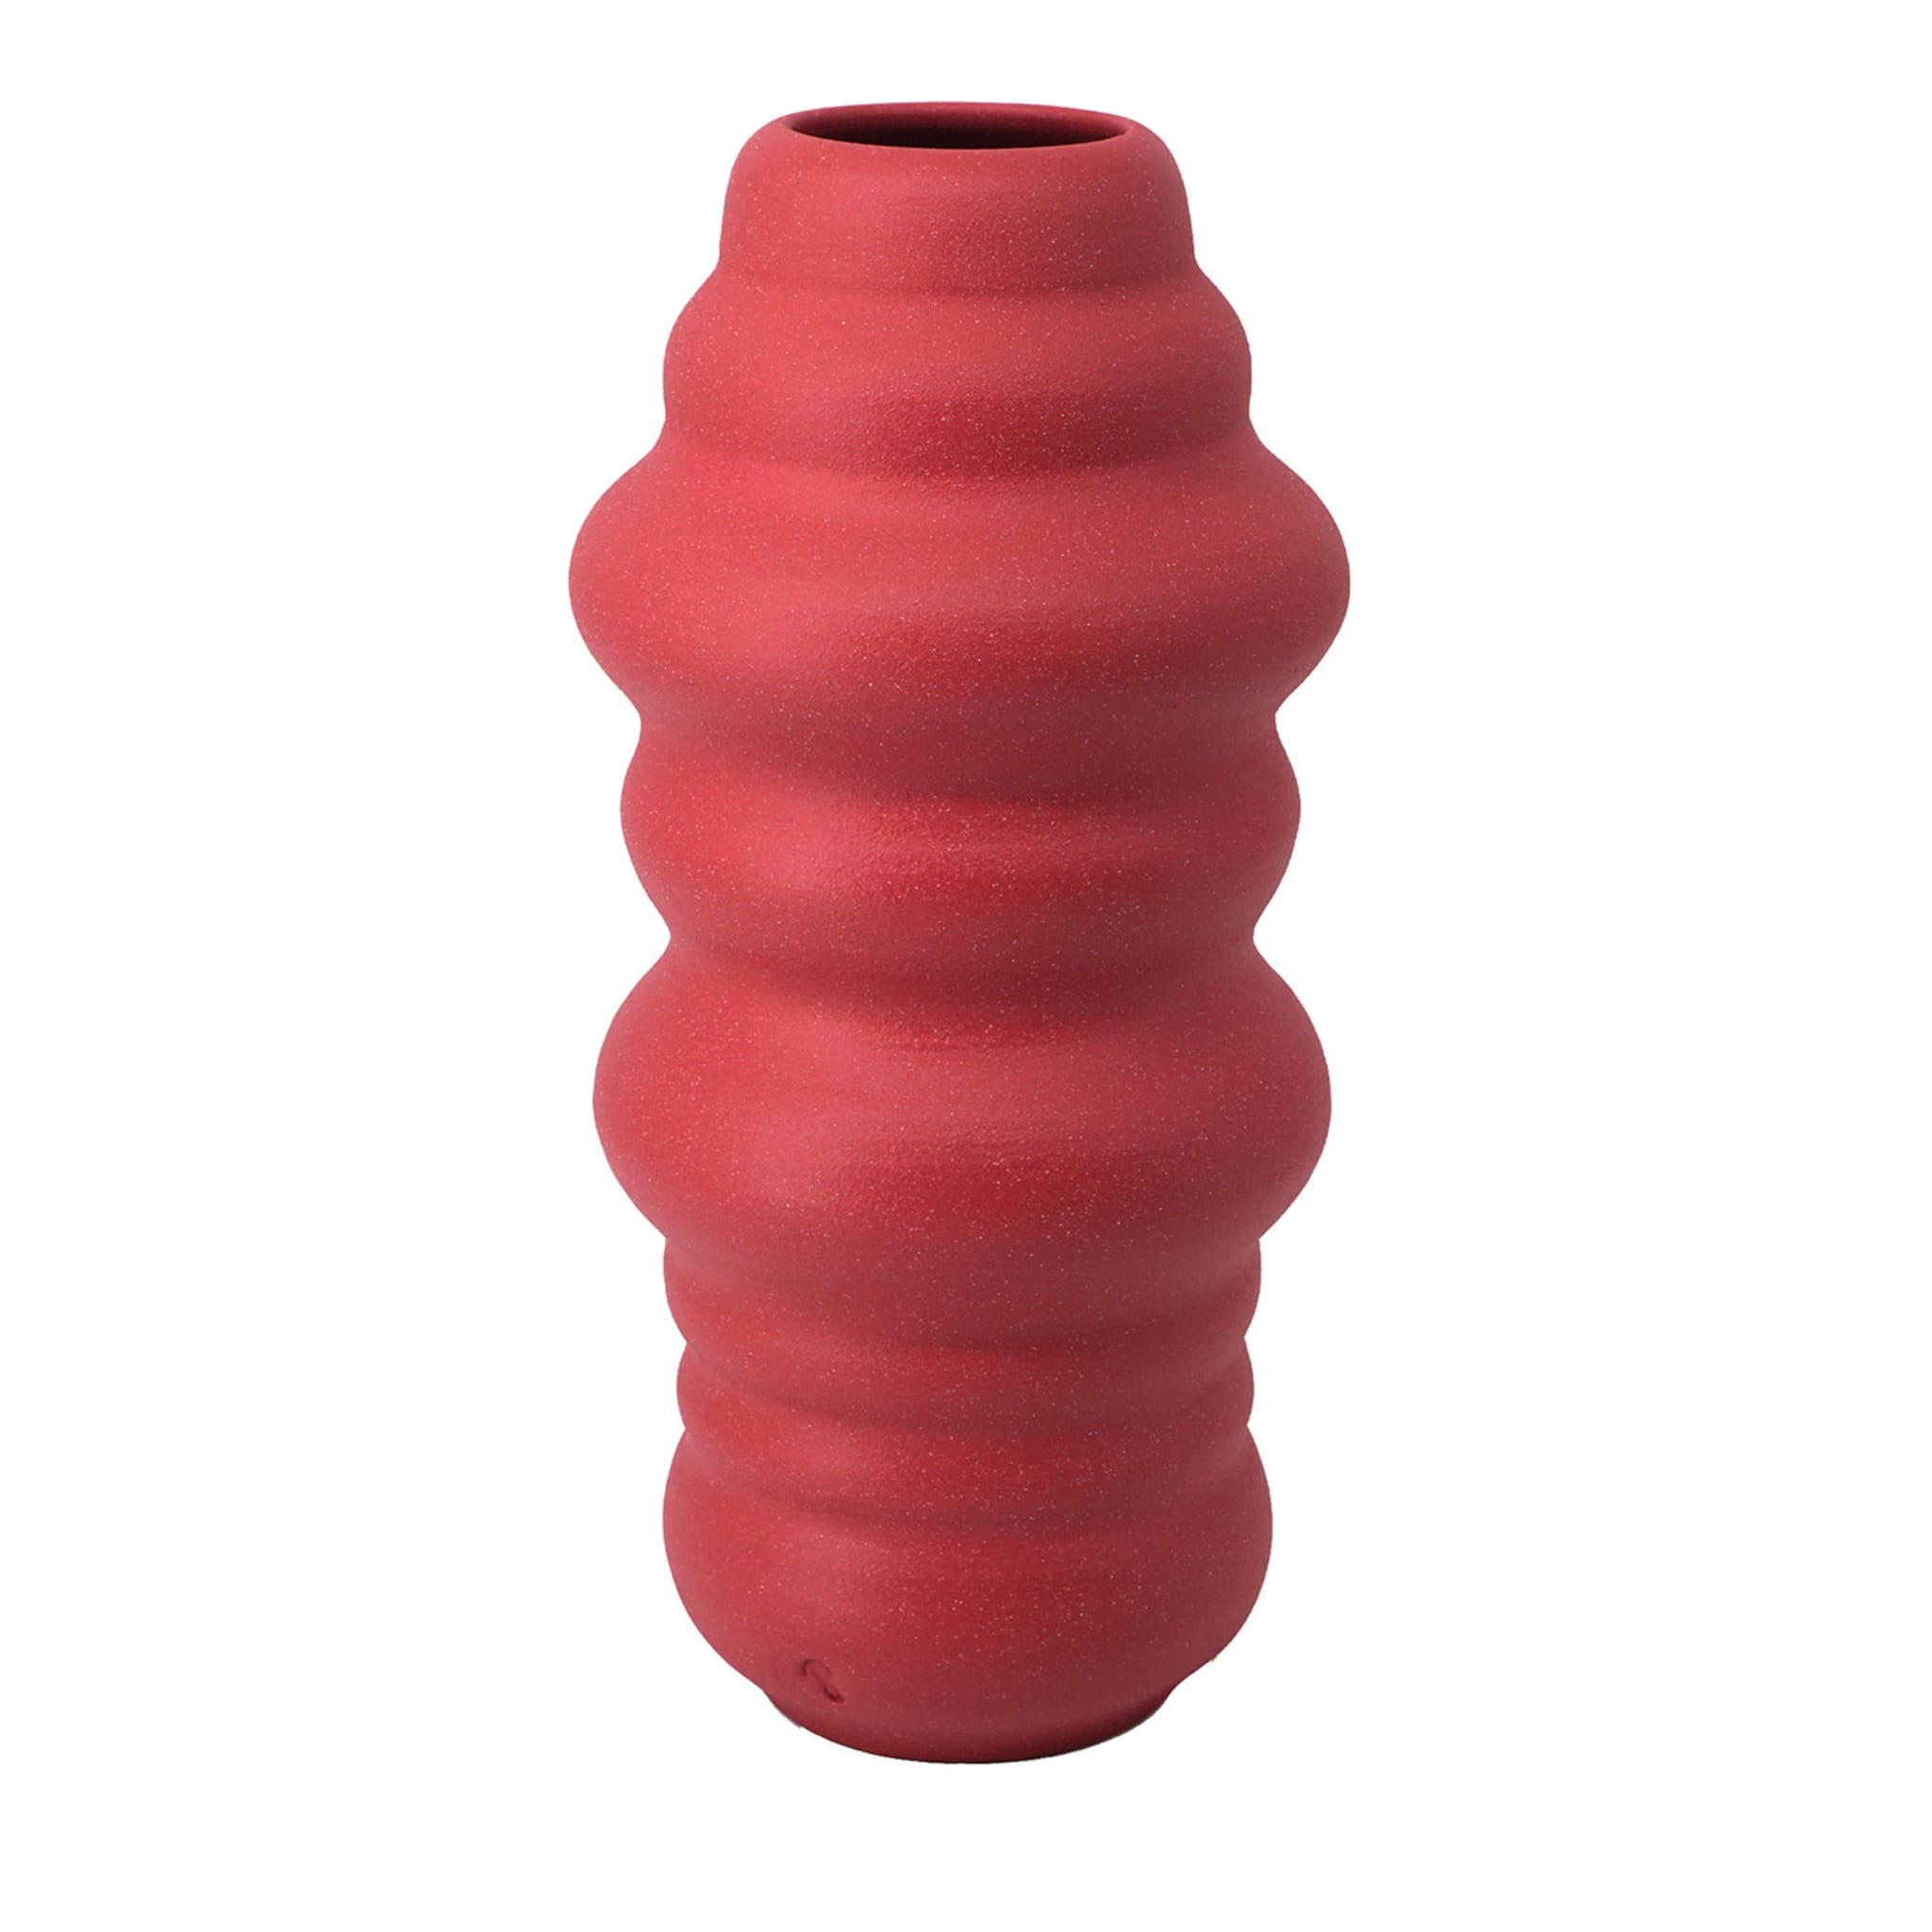 Crisalide Red Vase #8 - Main view